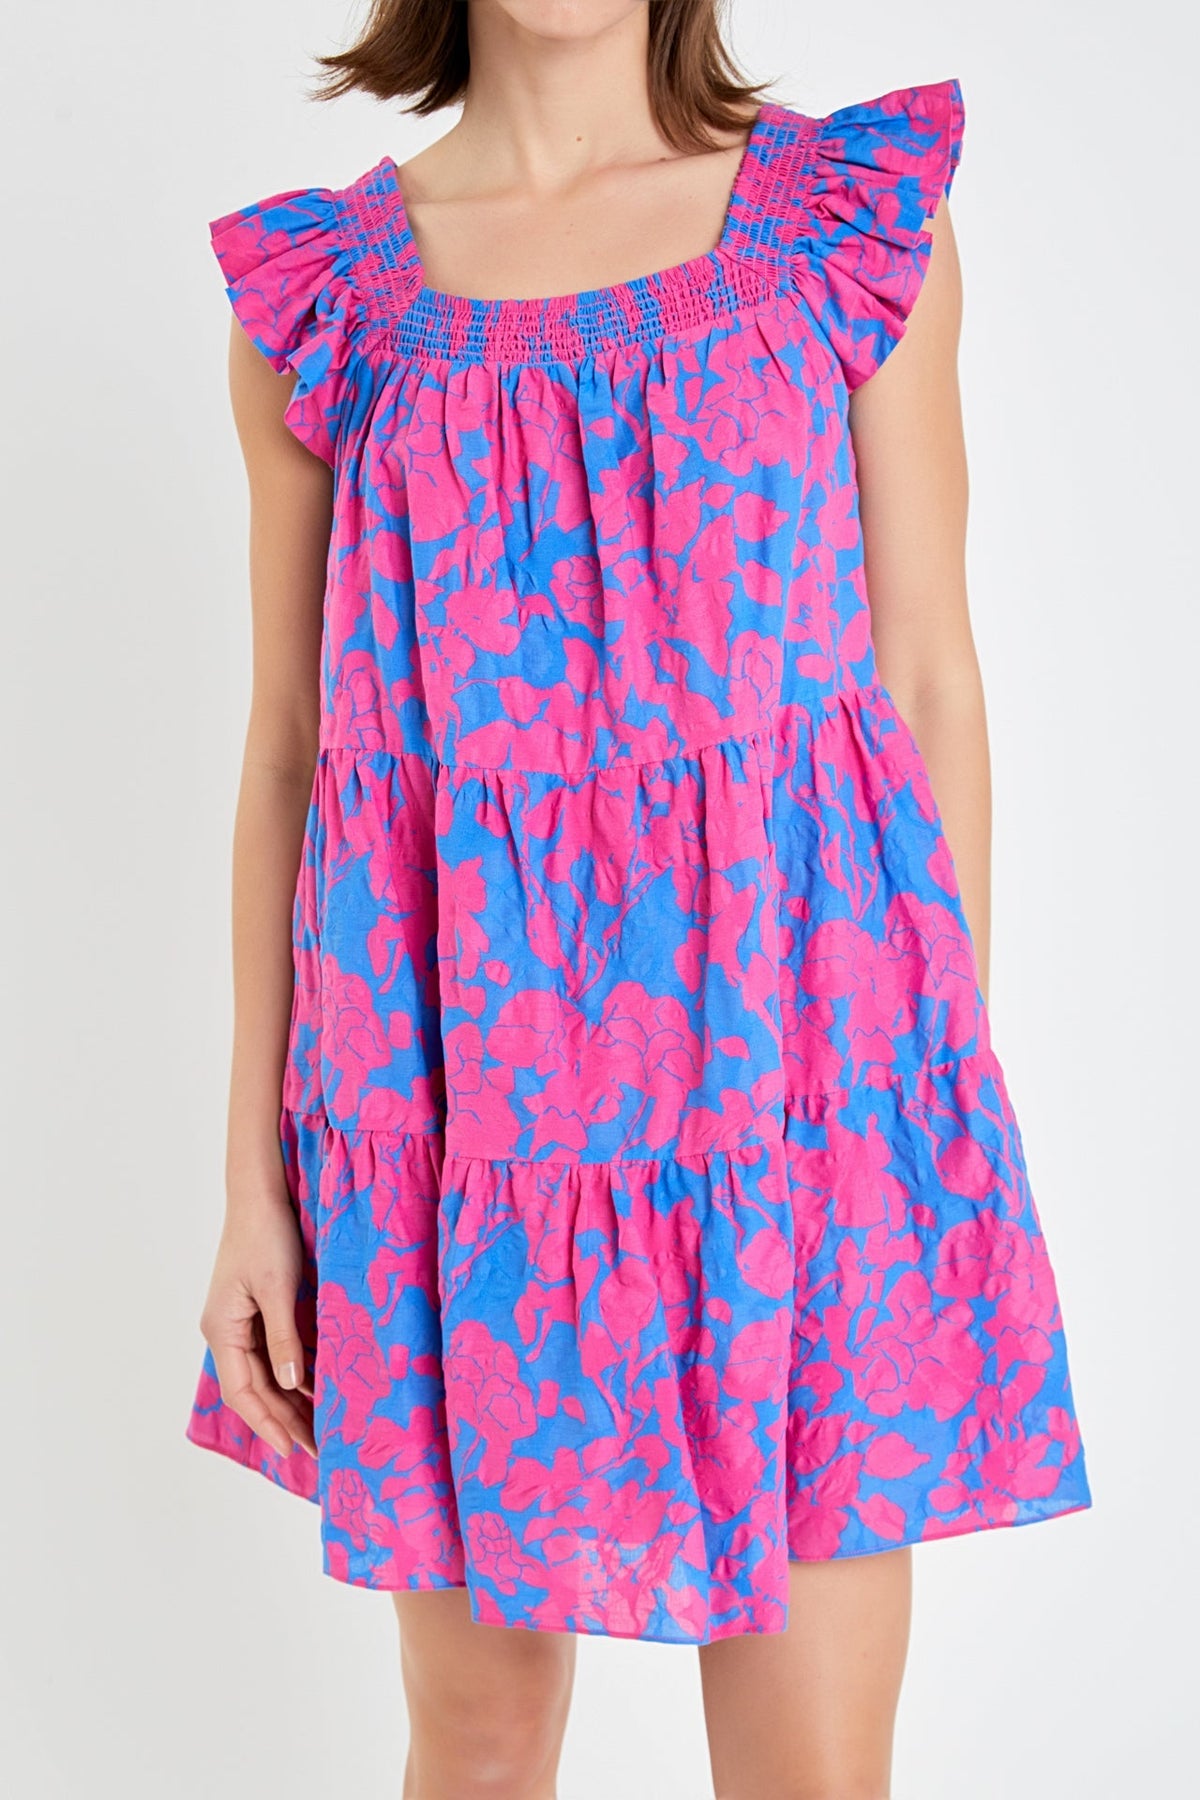 ENGLISH FACTORY - Floral Print Sleeveless Mini Dress - DRESSES available at Objectrare